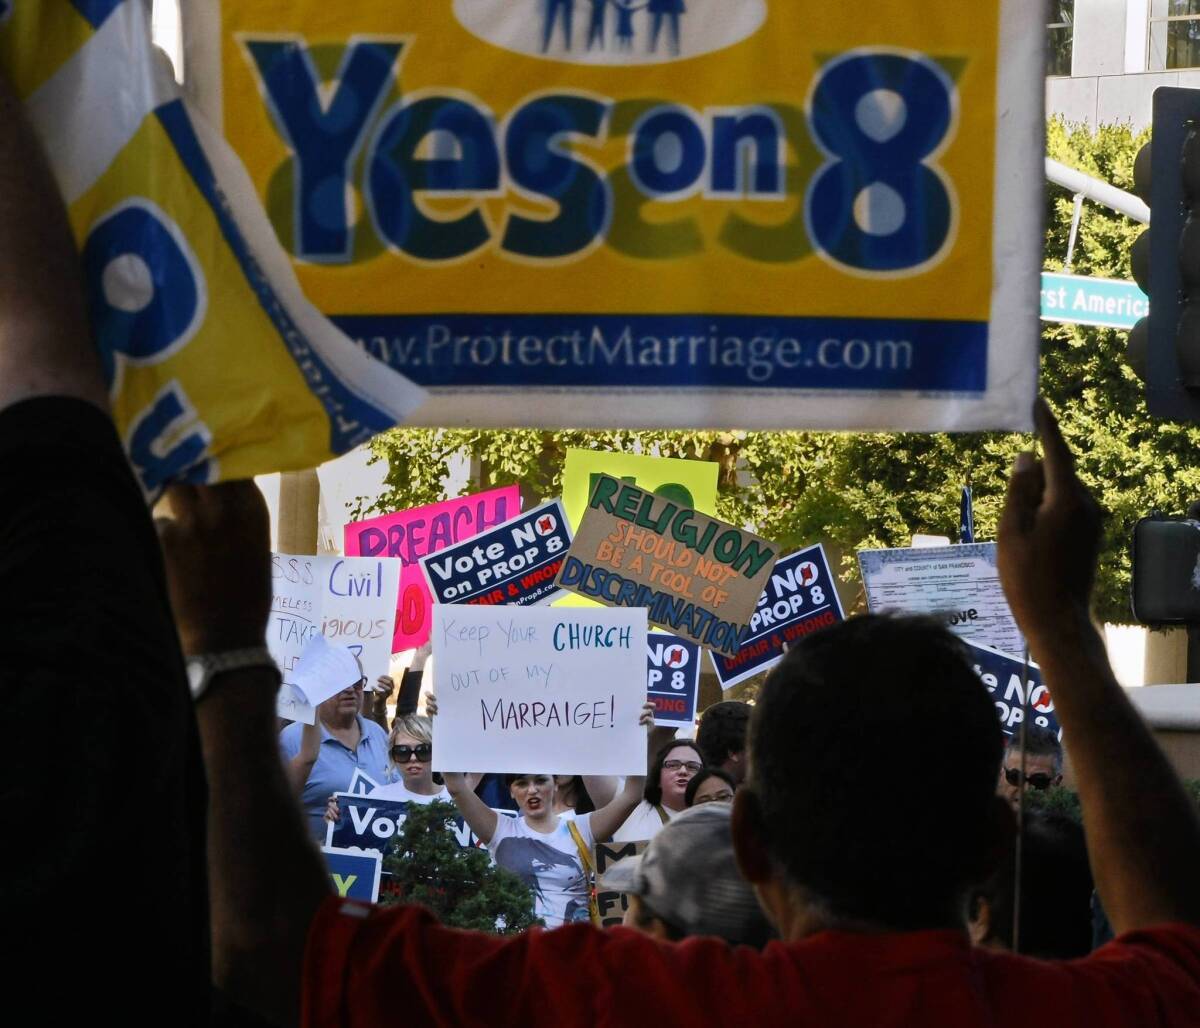 Opposing groups face off in November 2008 over California's Proposition 8, which banned same-sex marriage in the state. The Obama administration is urging the Supreme Court to strike down Proposition 8.